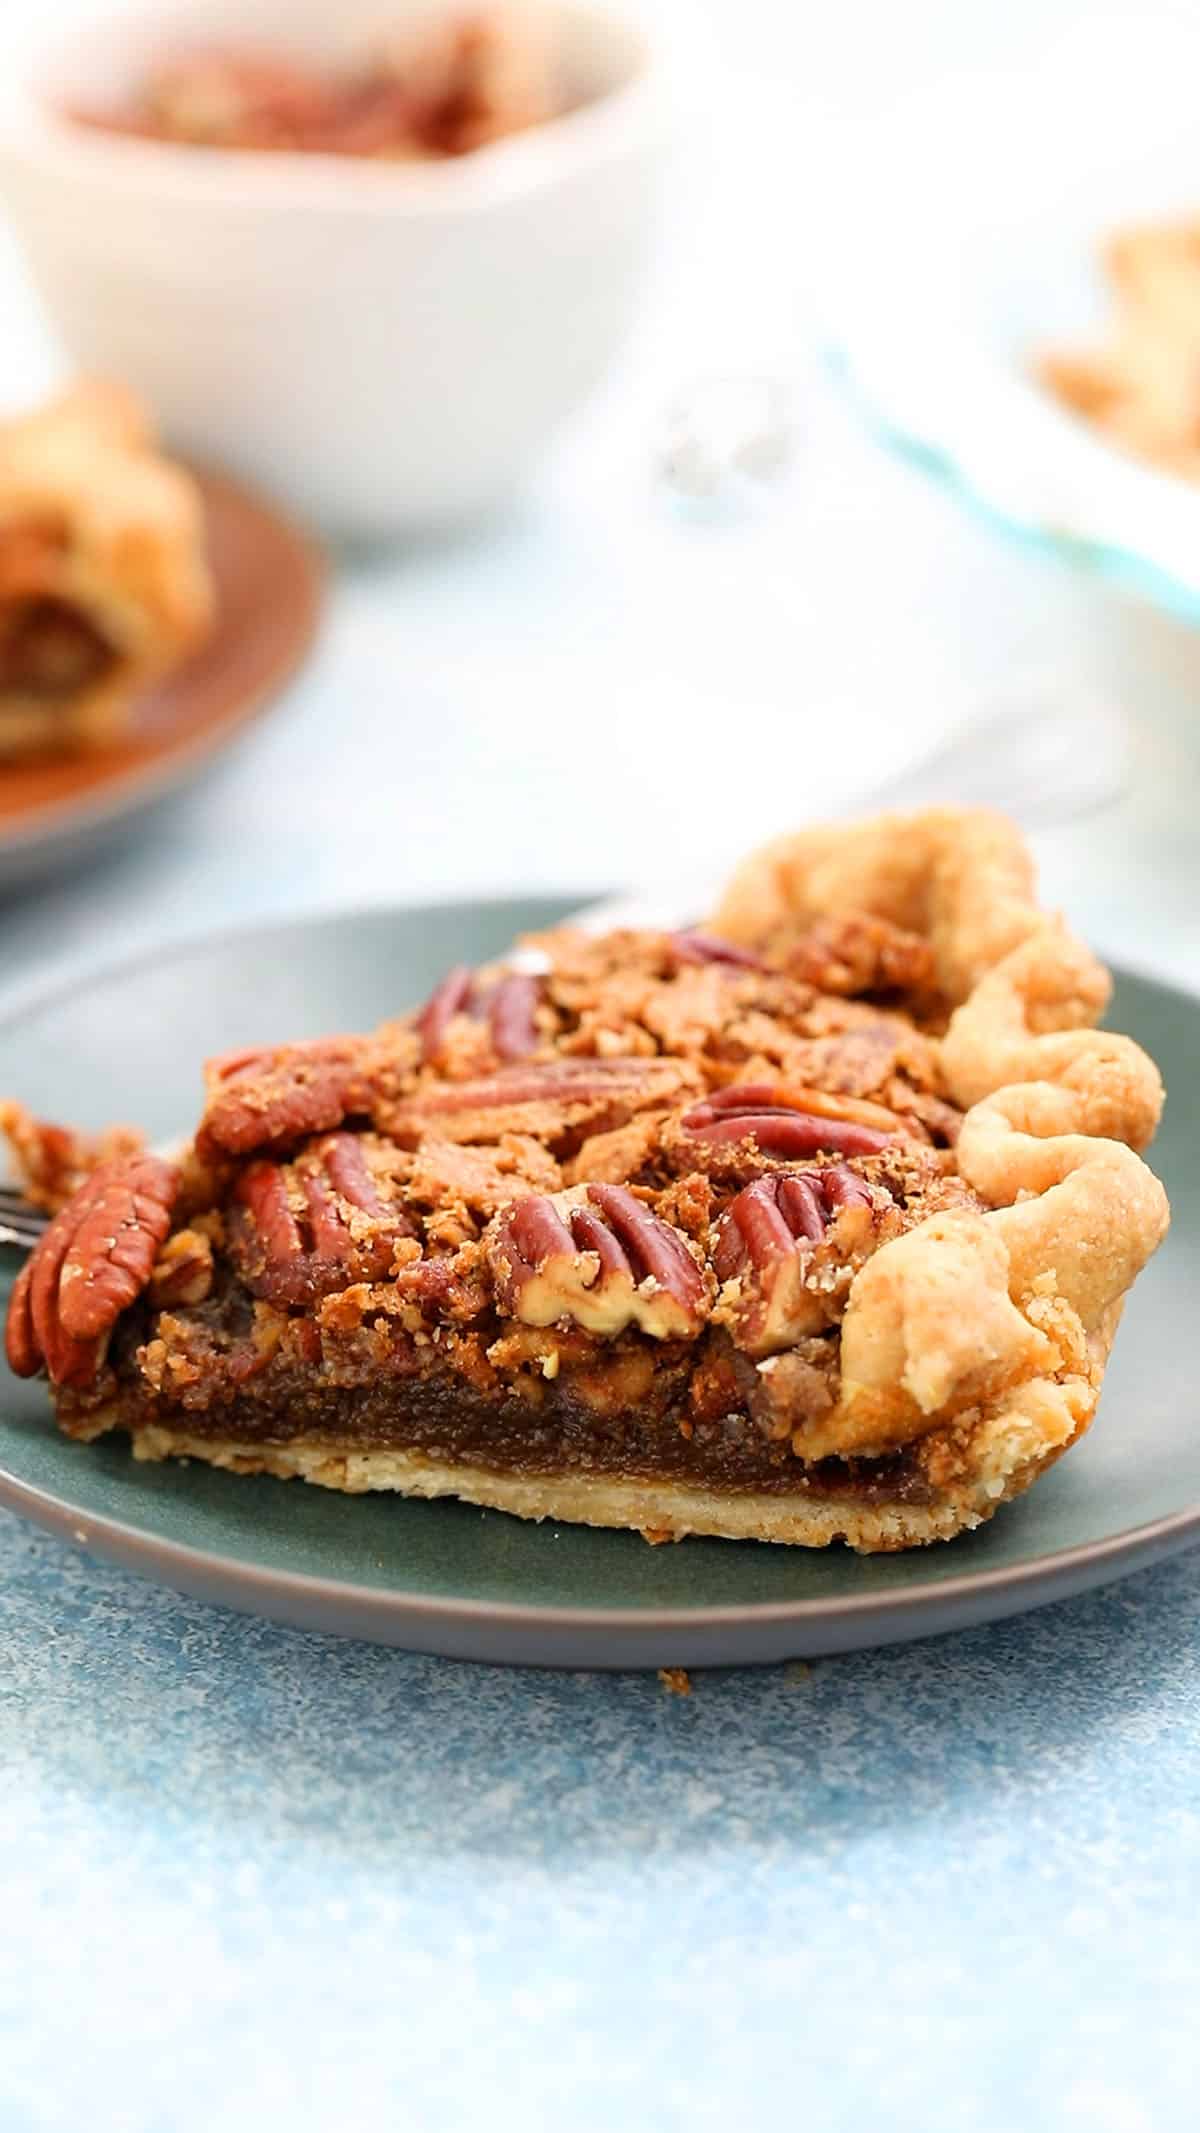 a slice of pecan pie placed on a small green plate.